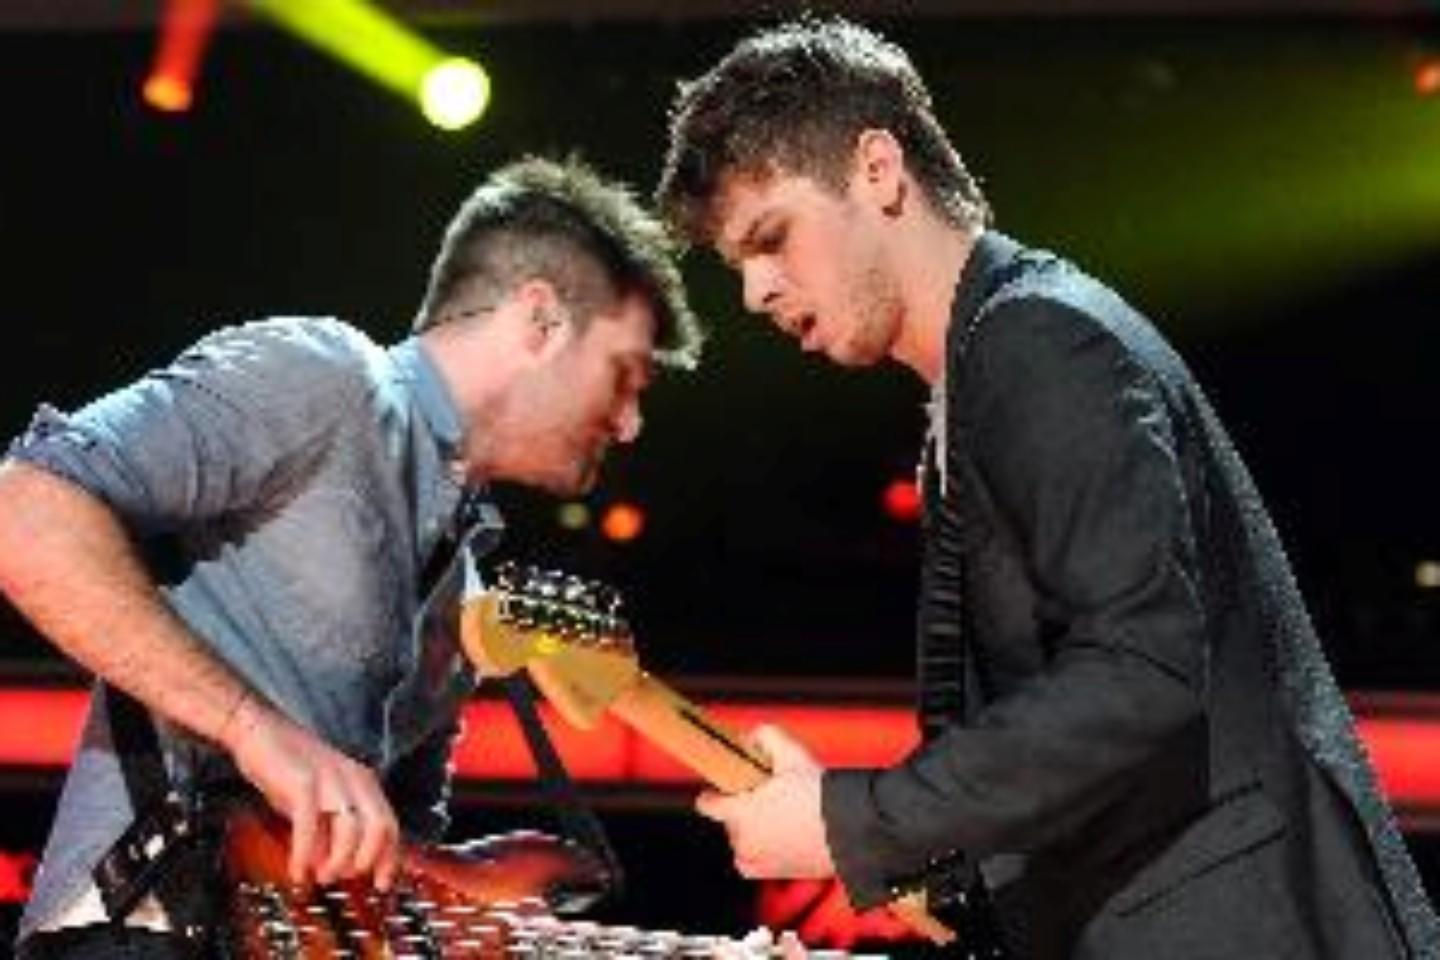 Foster the People Tickets | Foster the People Concert Tickets and 2019 Tour Dates ...1440 x 960